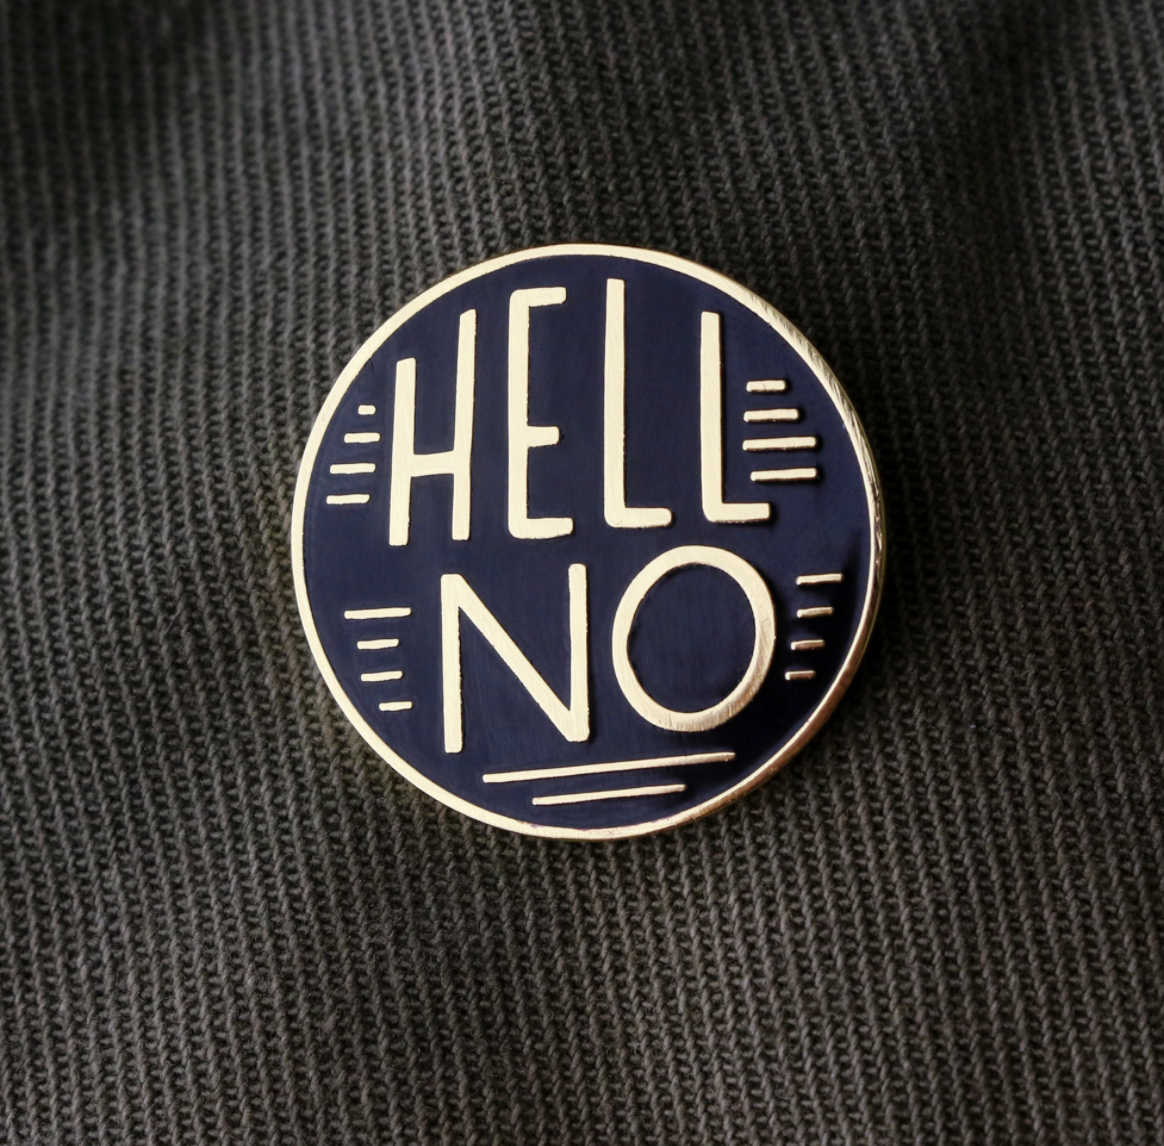 By Paper Parasol Press. Has "Hell No" become part of your daily repertoire? Hell No Pin details: Black and gold. Hard enamel cloisonne pin. Rubber clutch backing. Measures 1" round. Please note that due to everyone’s monitor displaying differently, the colors you see may vary.